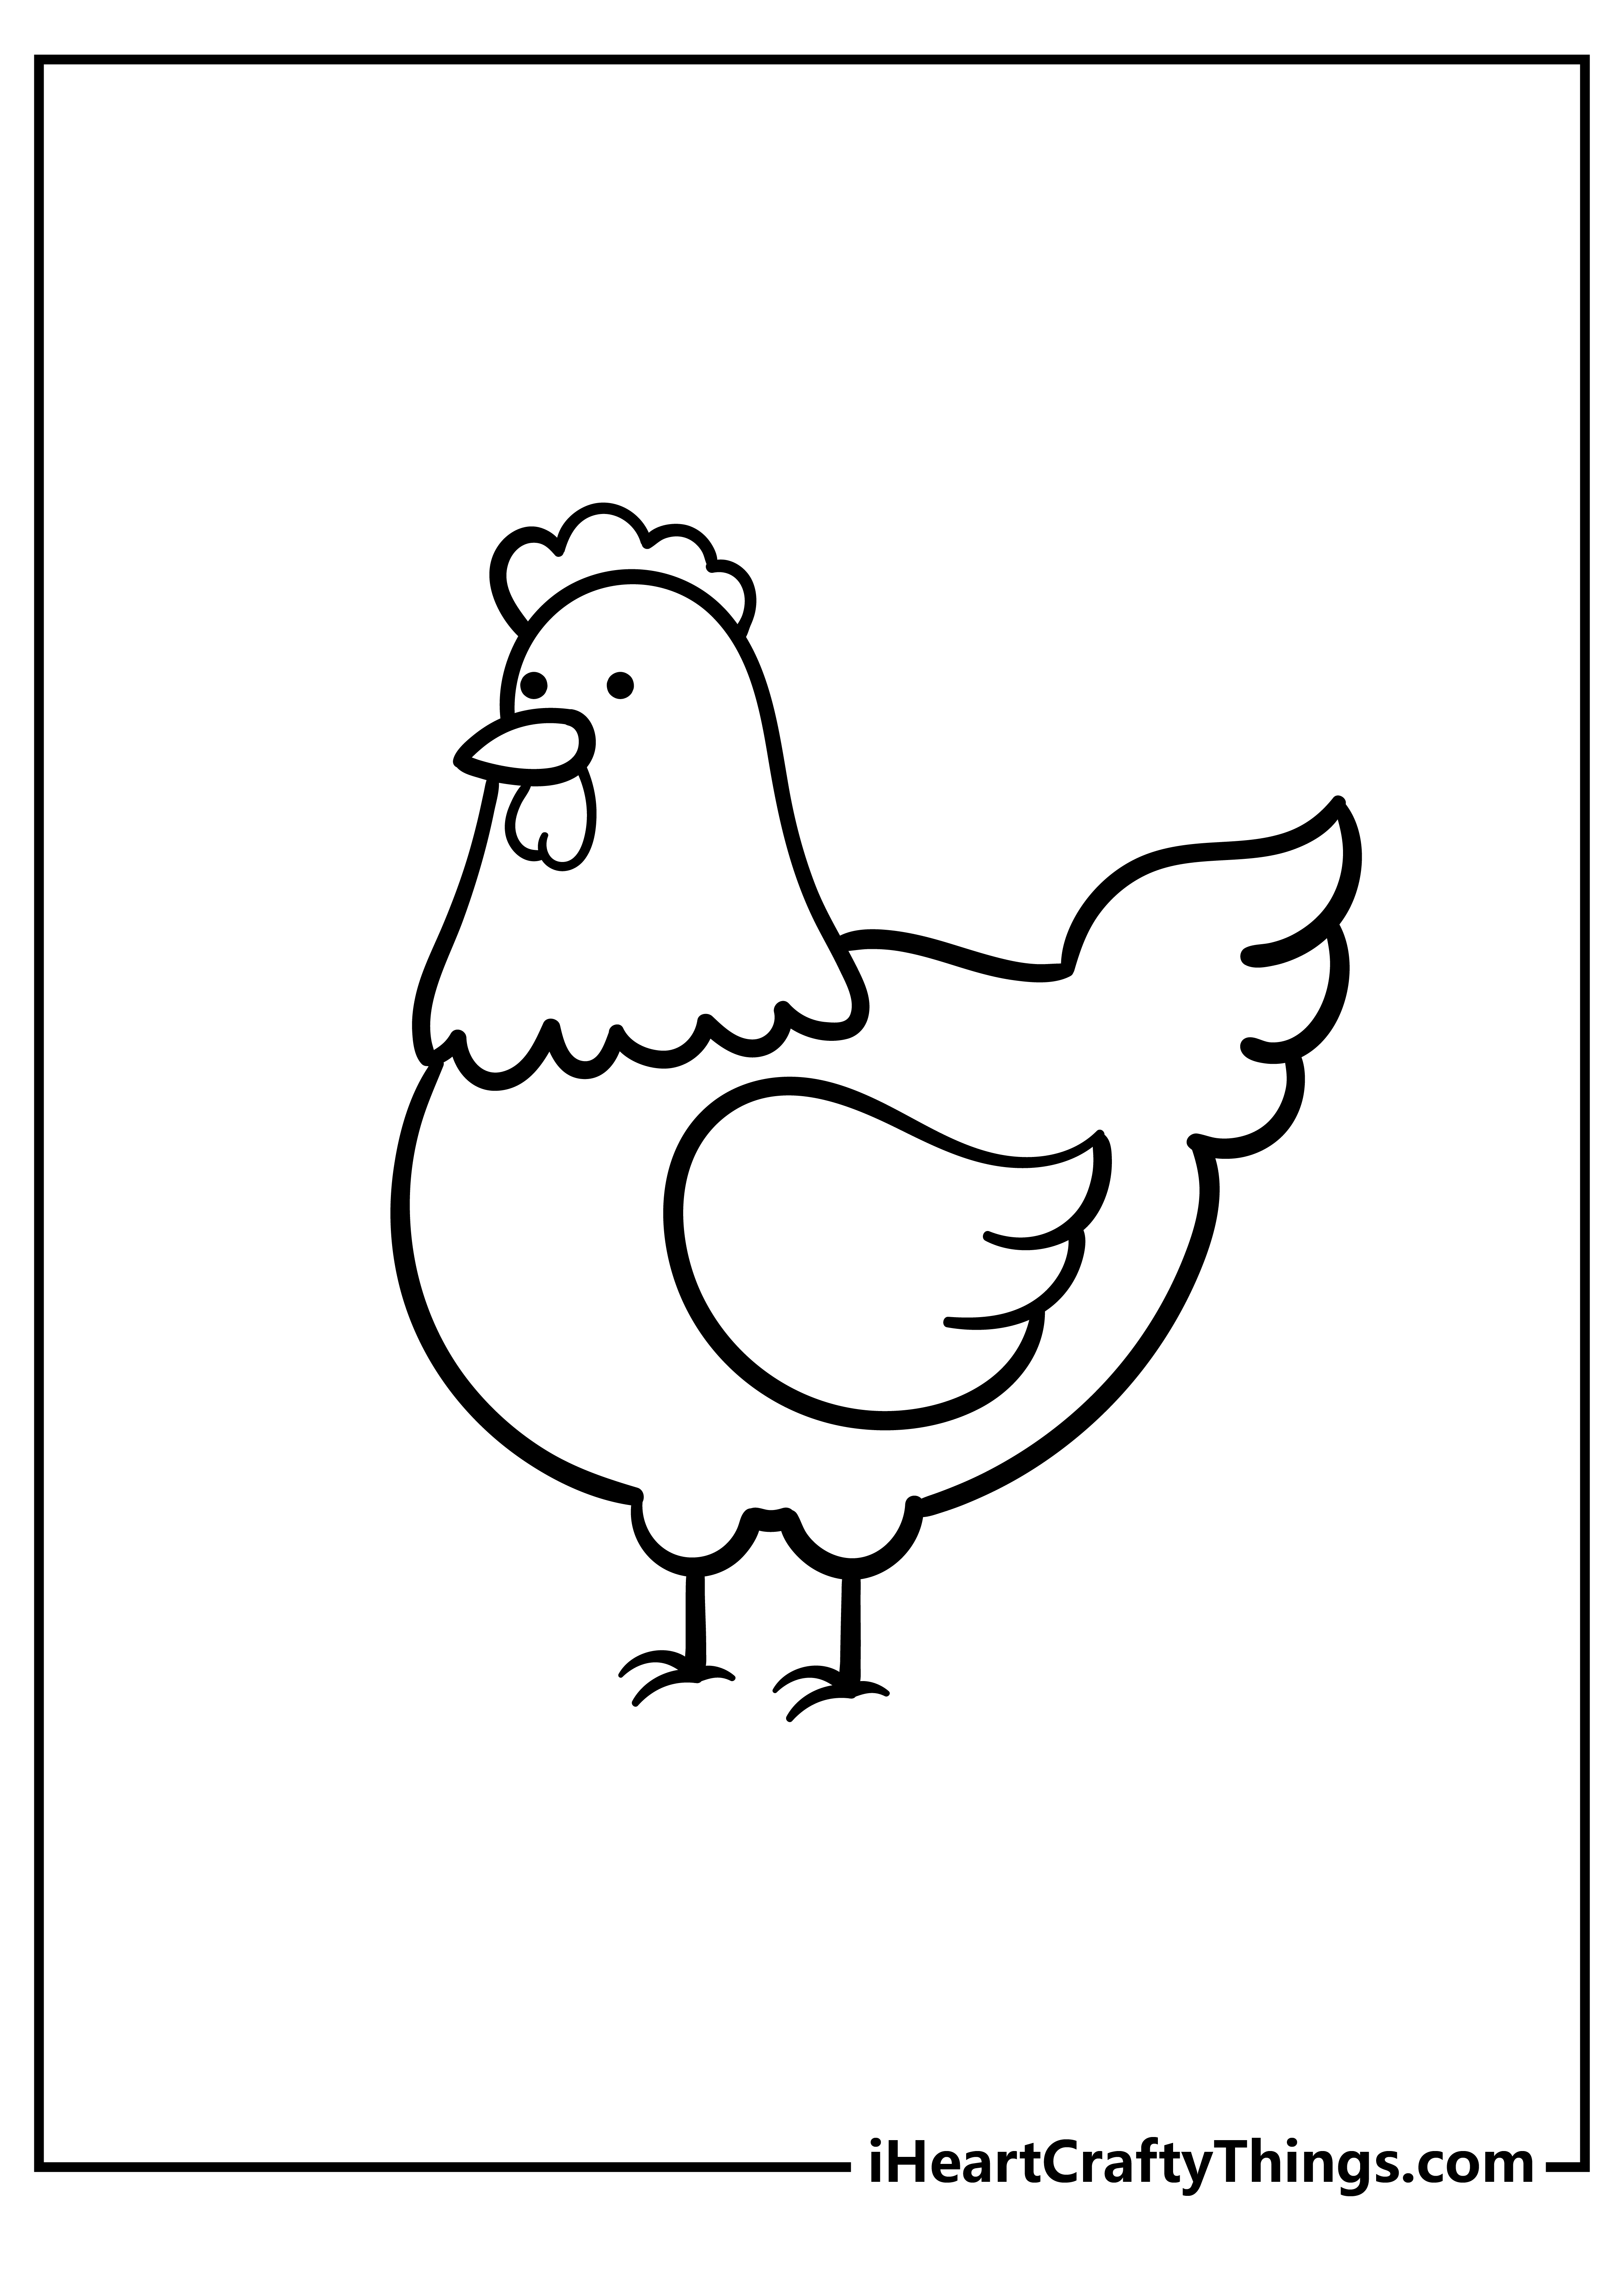 Chicken Coloring Book for adults free download